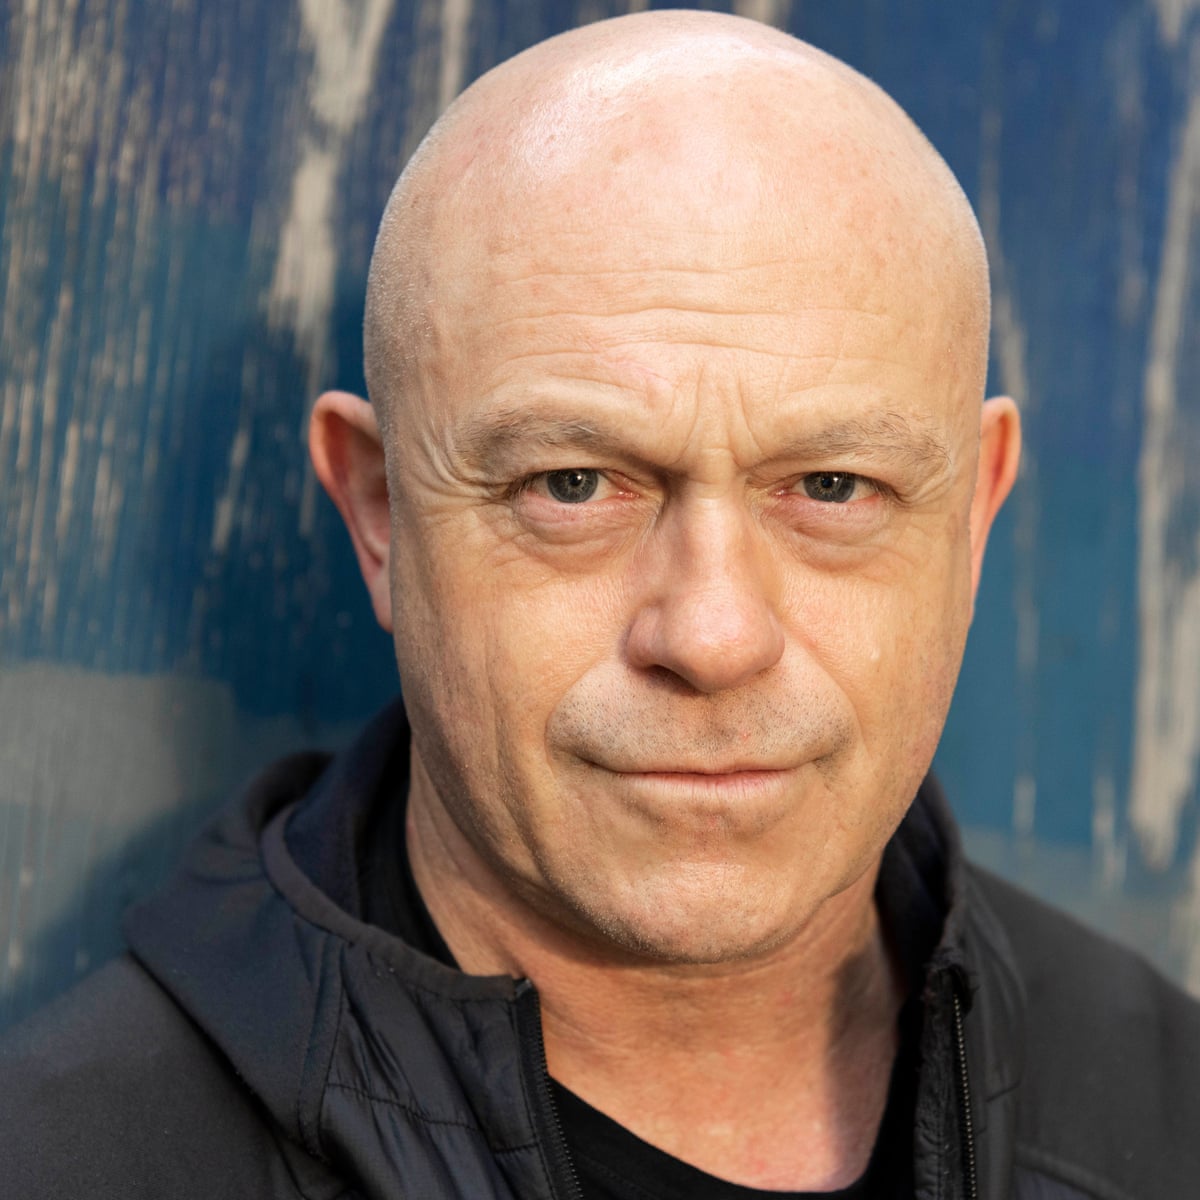 Ross Kemp turned down trip on Titanic submersible over safety fears, Titanic sub incident